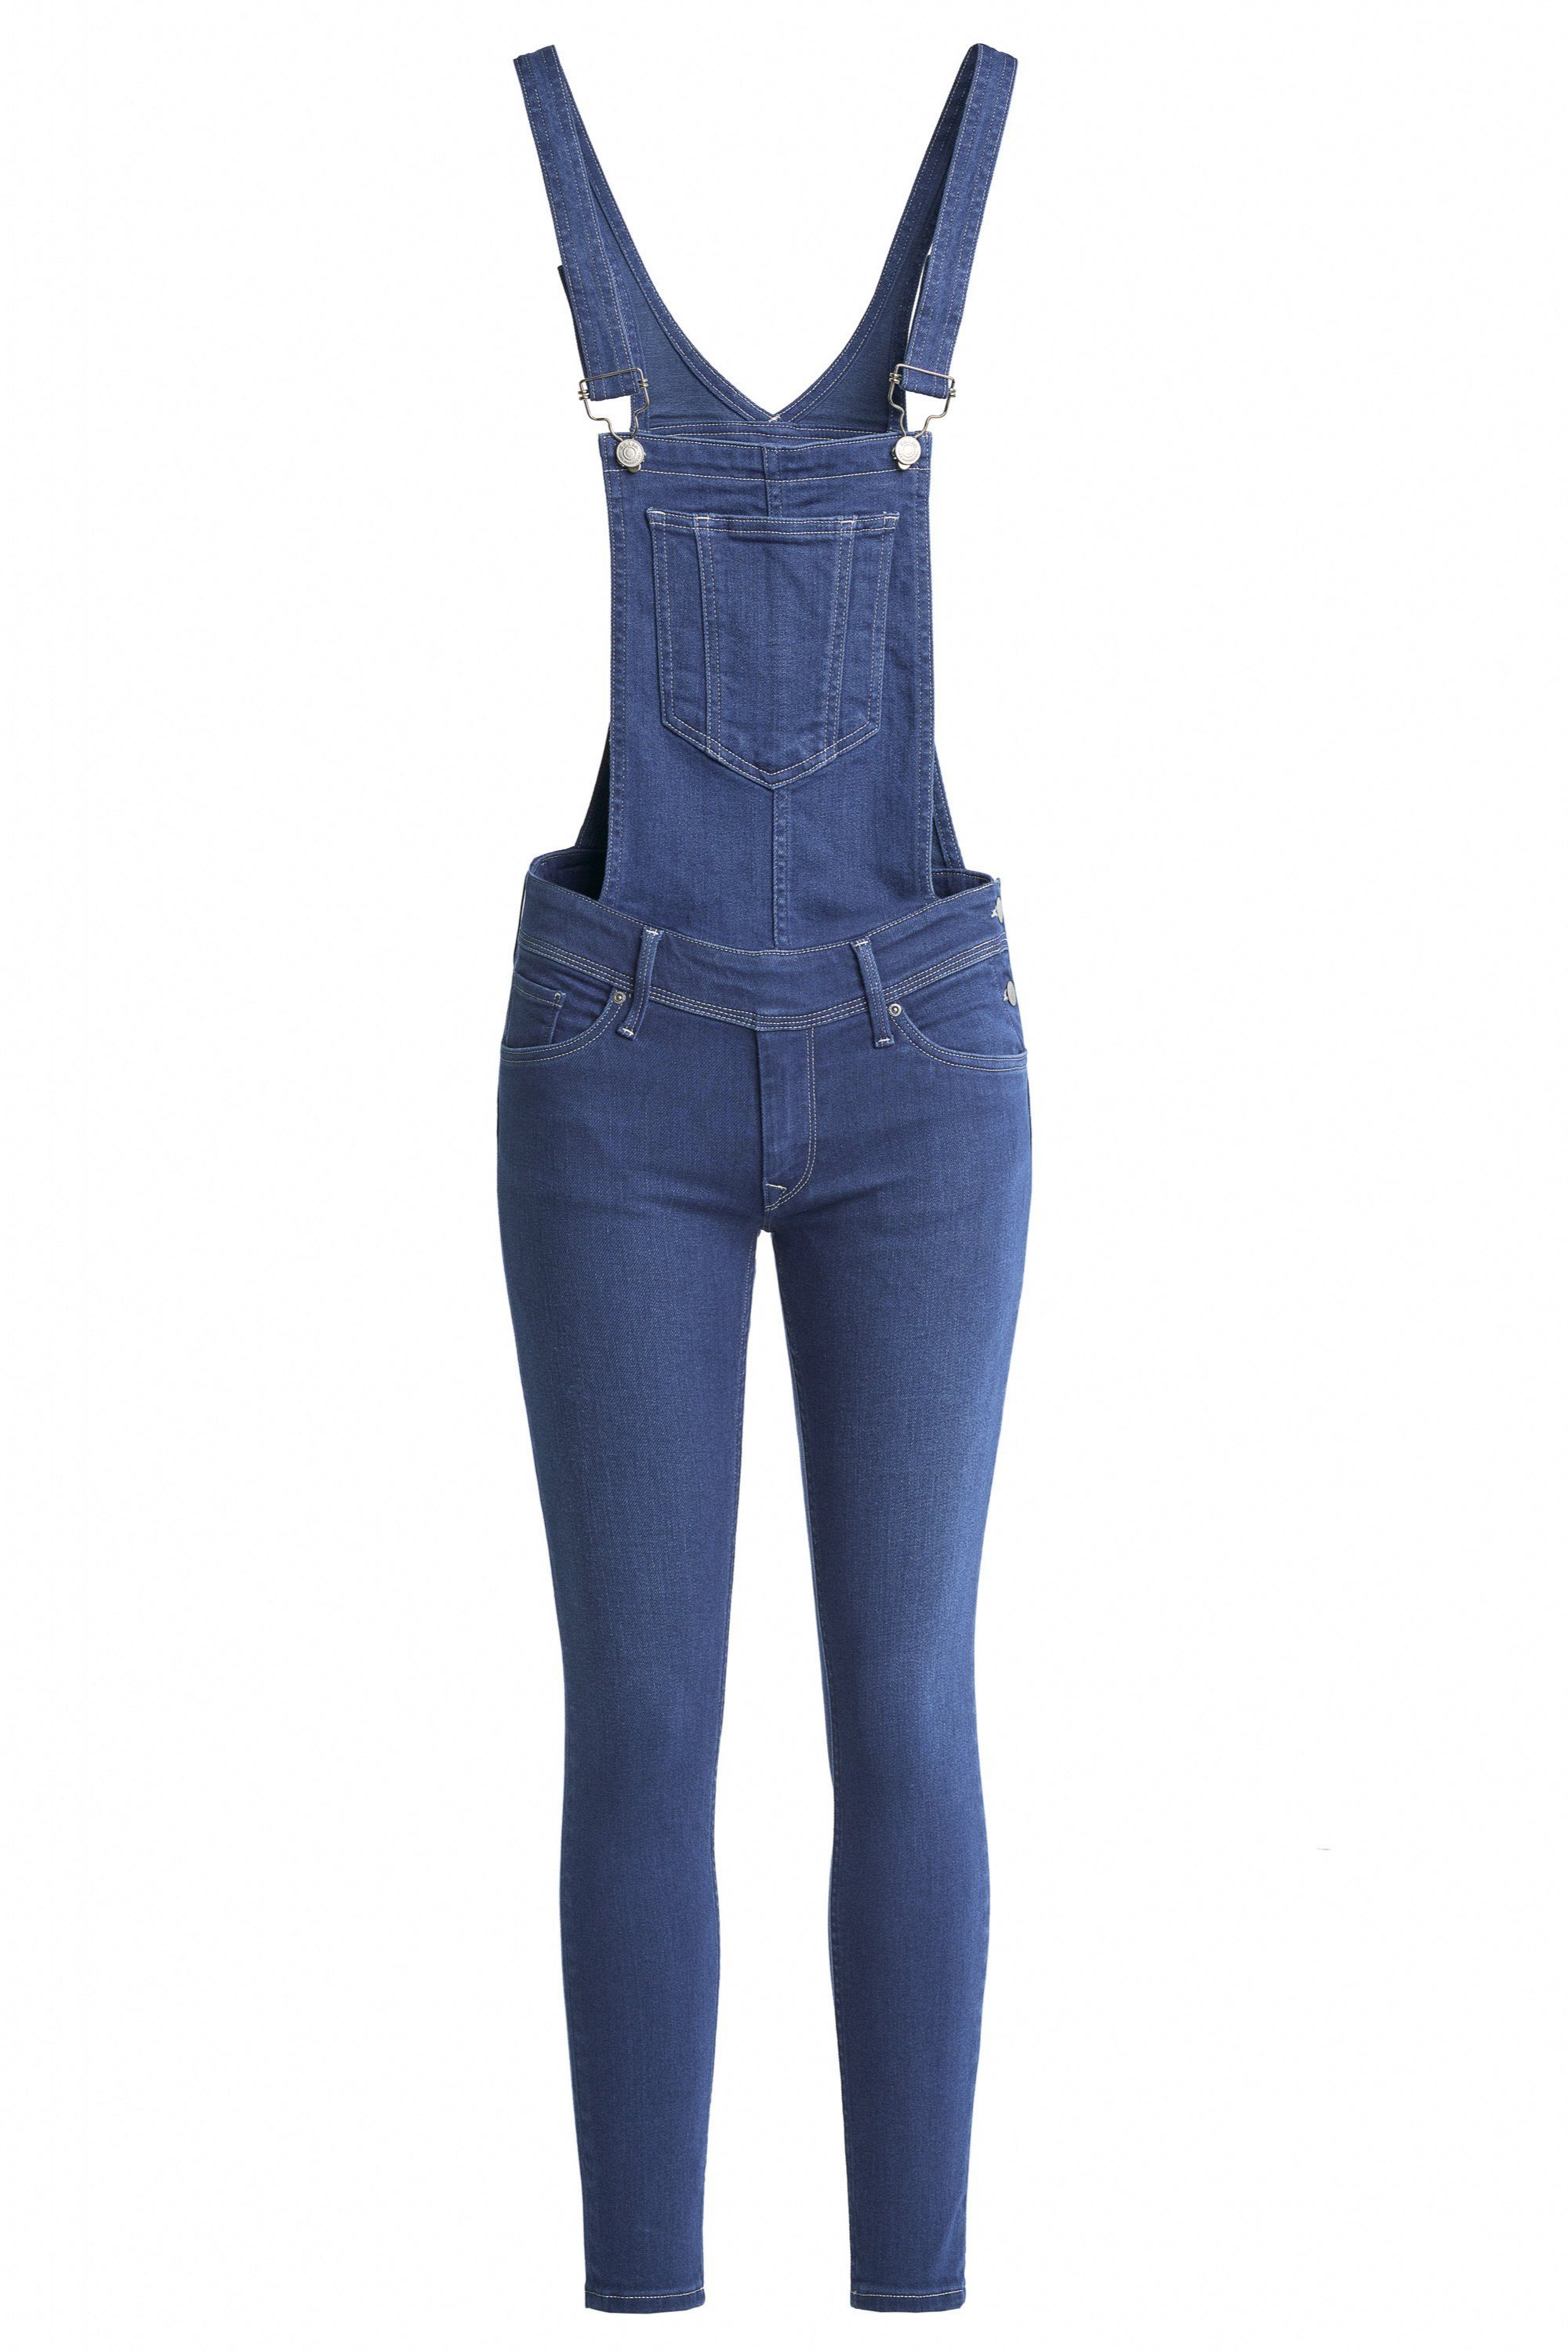 bright UP Stretch-Jeans 125181.8503 SALSA WONDER Salsa PUSH OVERALL blue JEANS